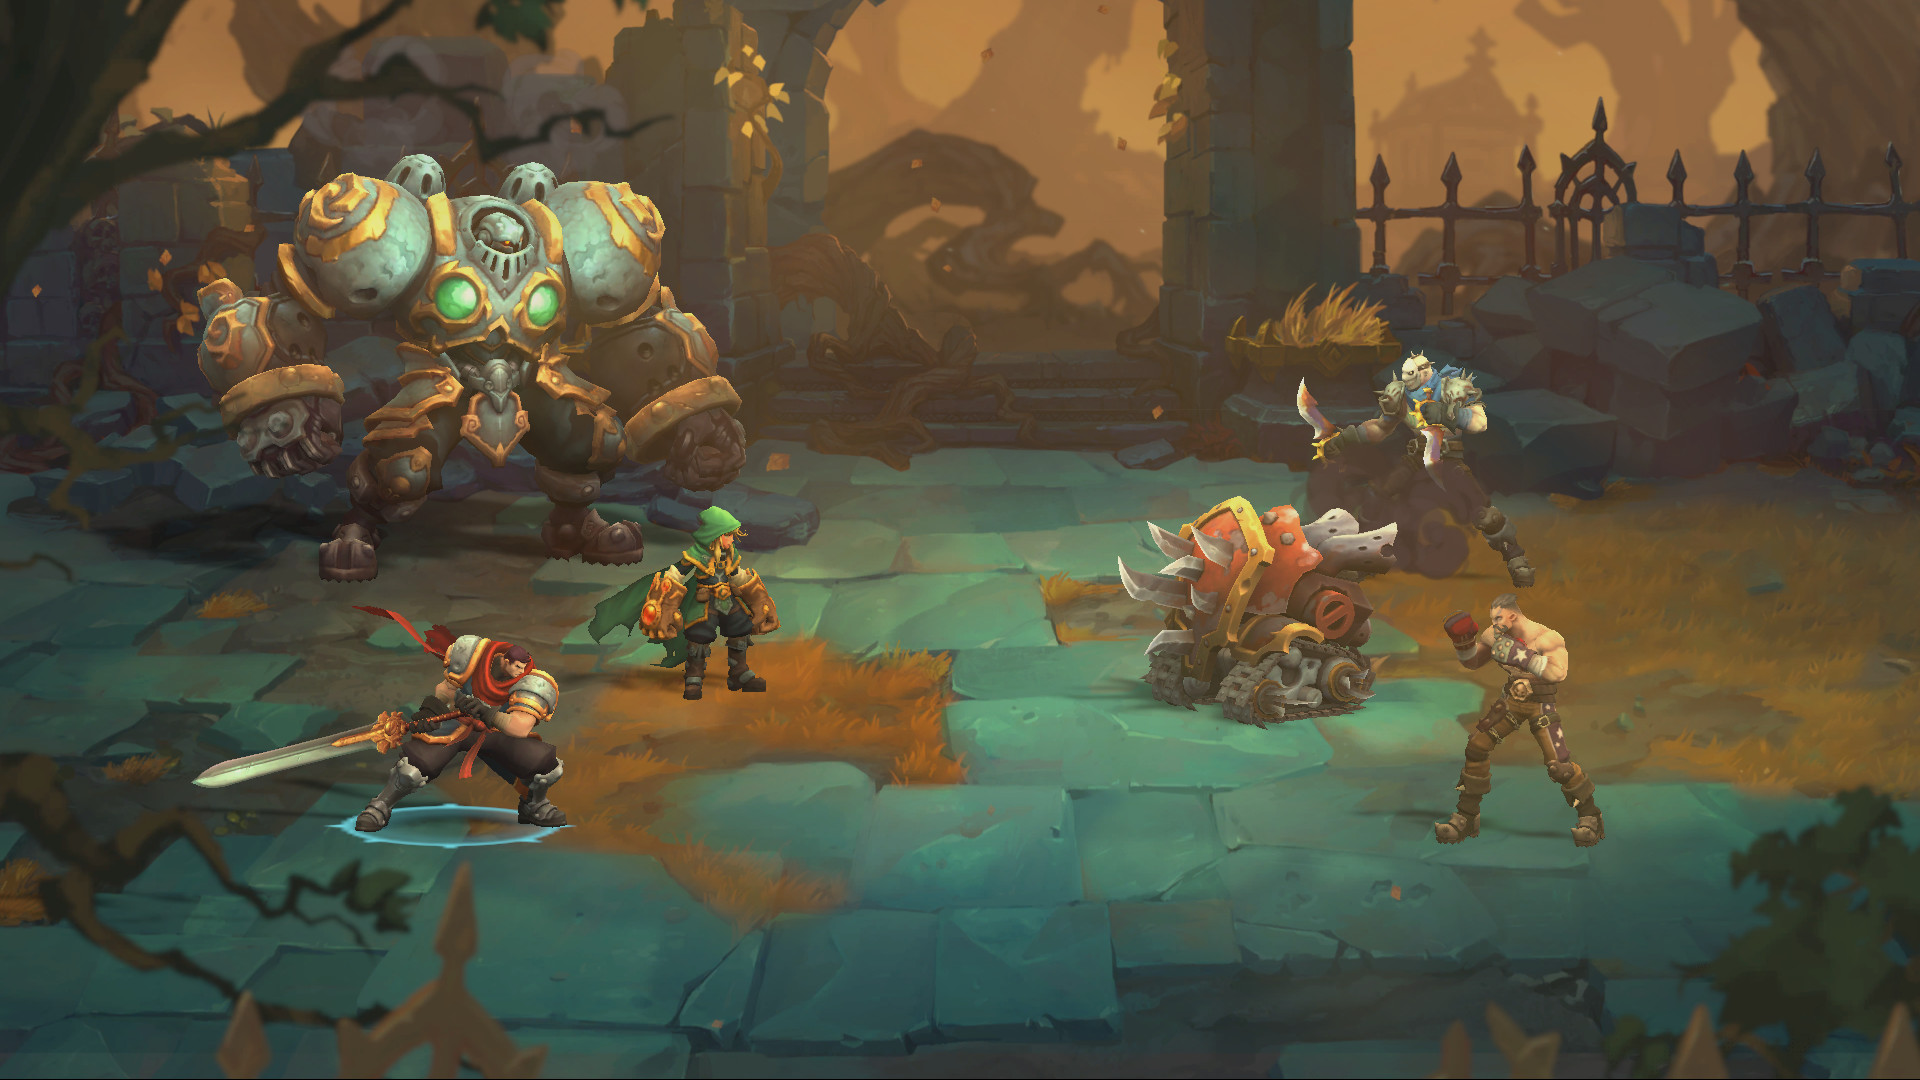 battle chasers nightwar codes for android